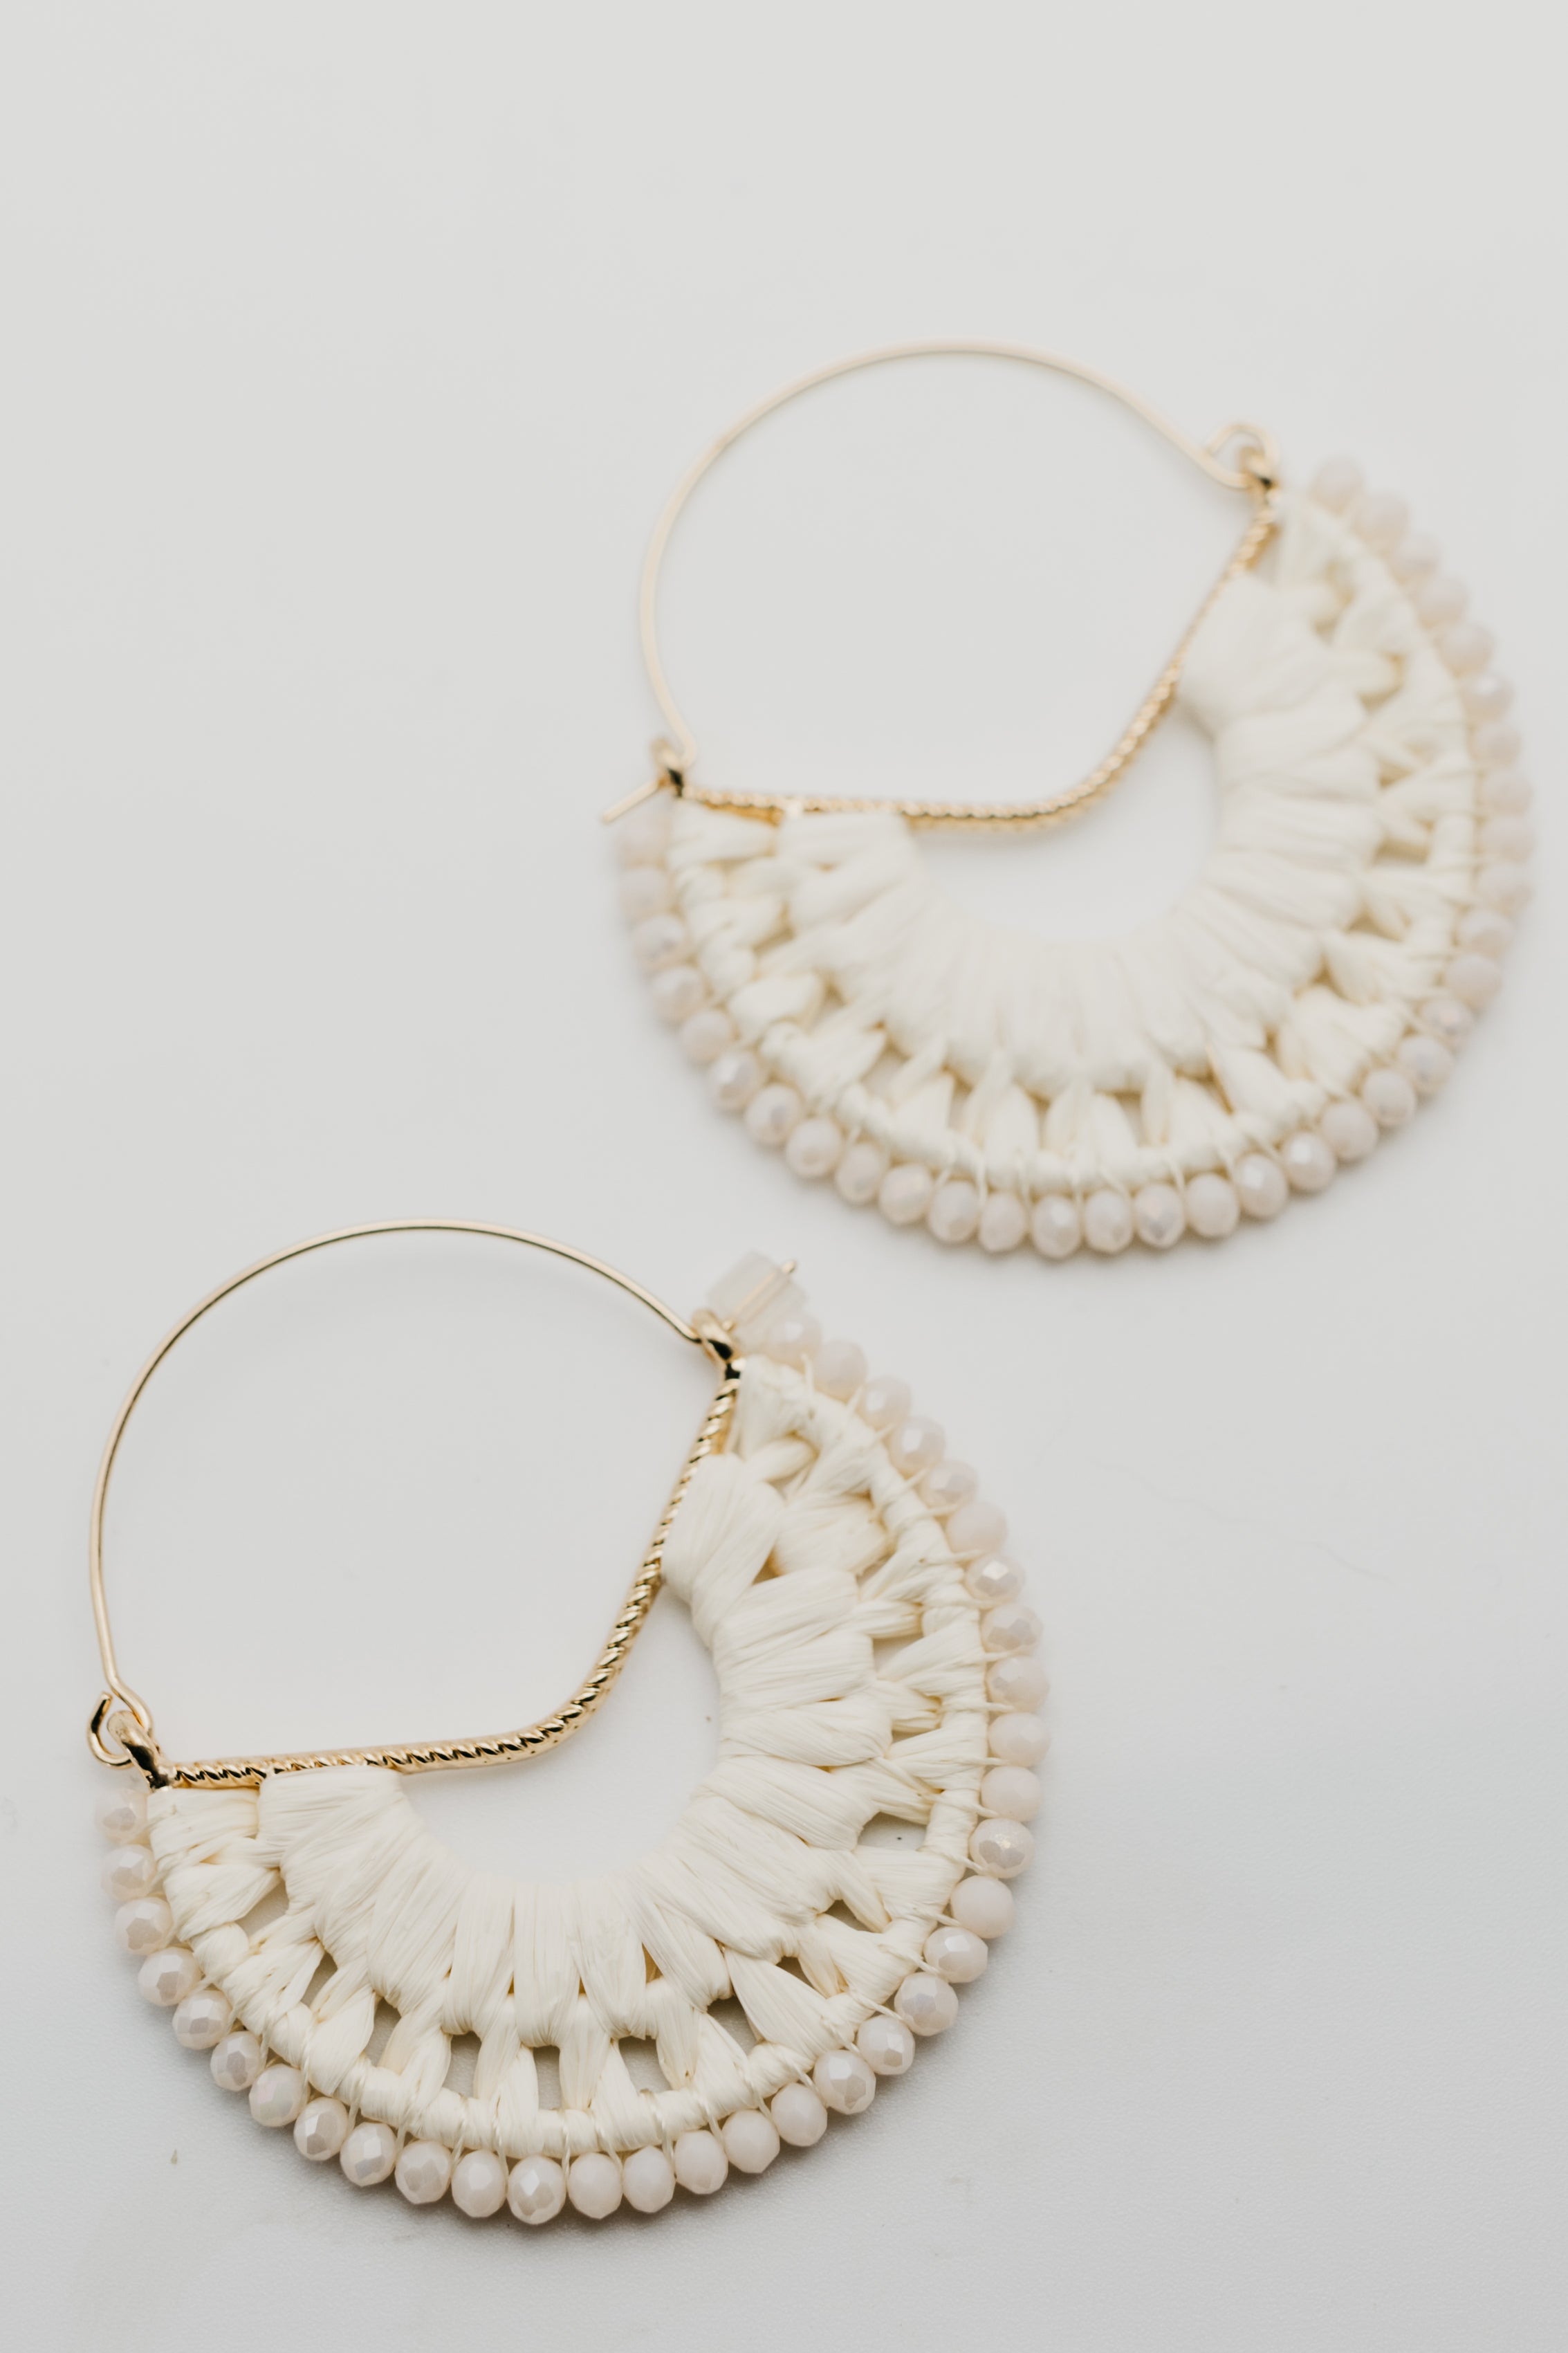 The Paxton Woven Hoop Earring